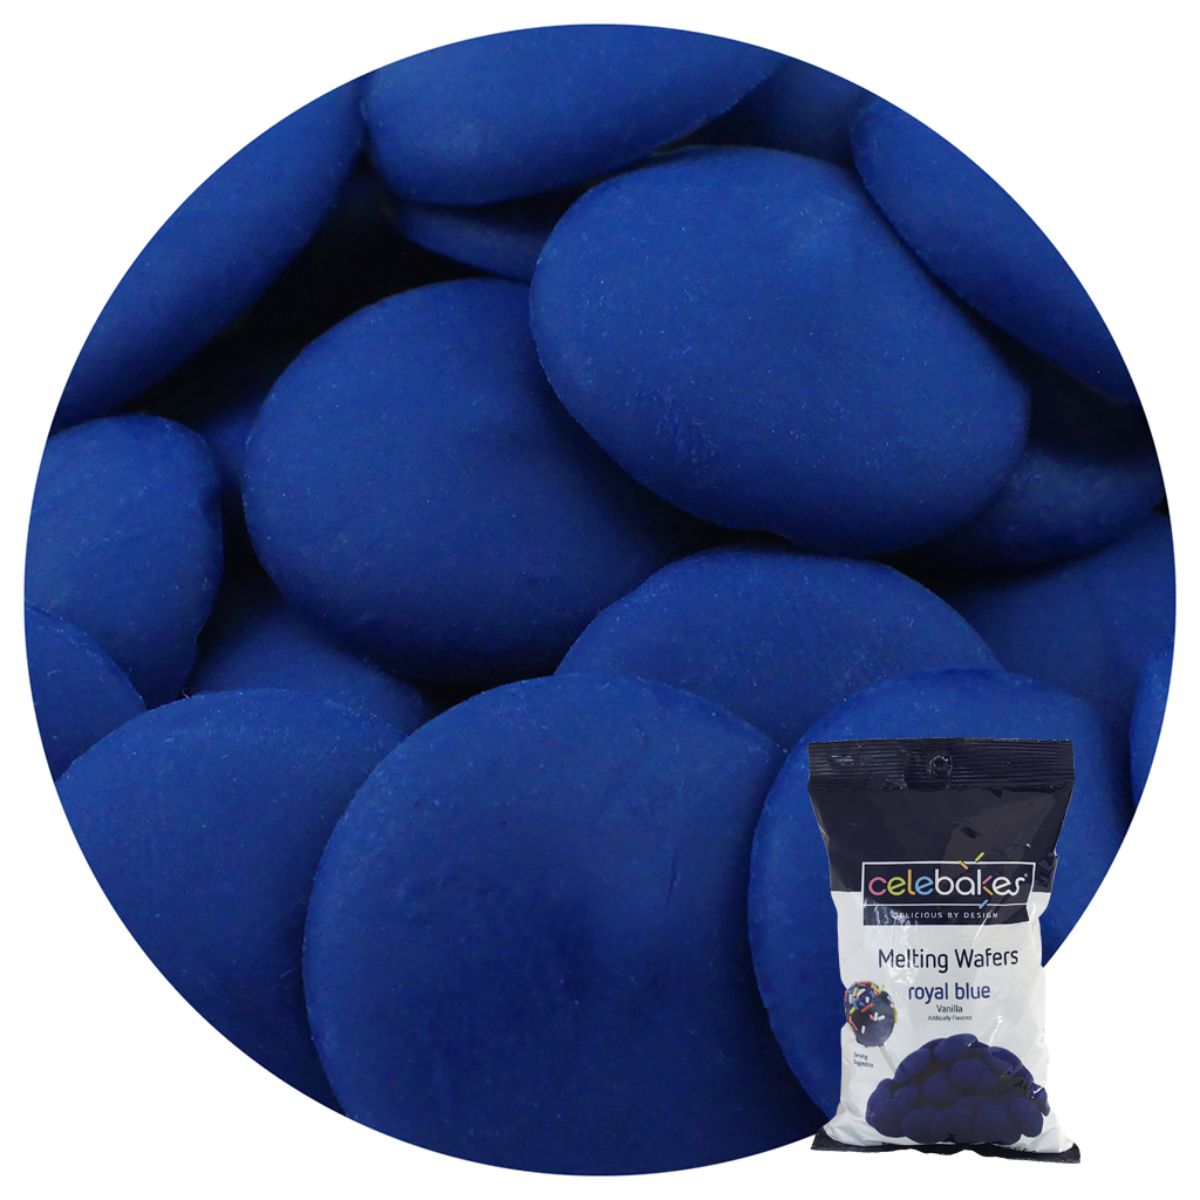 Merckens Royal Blue Confectionery candy